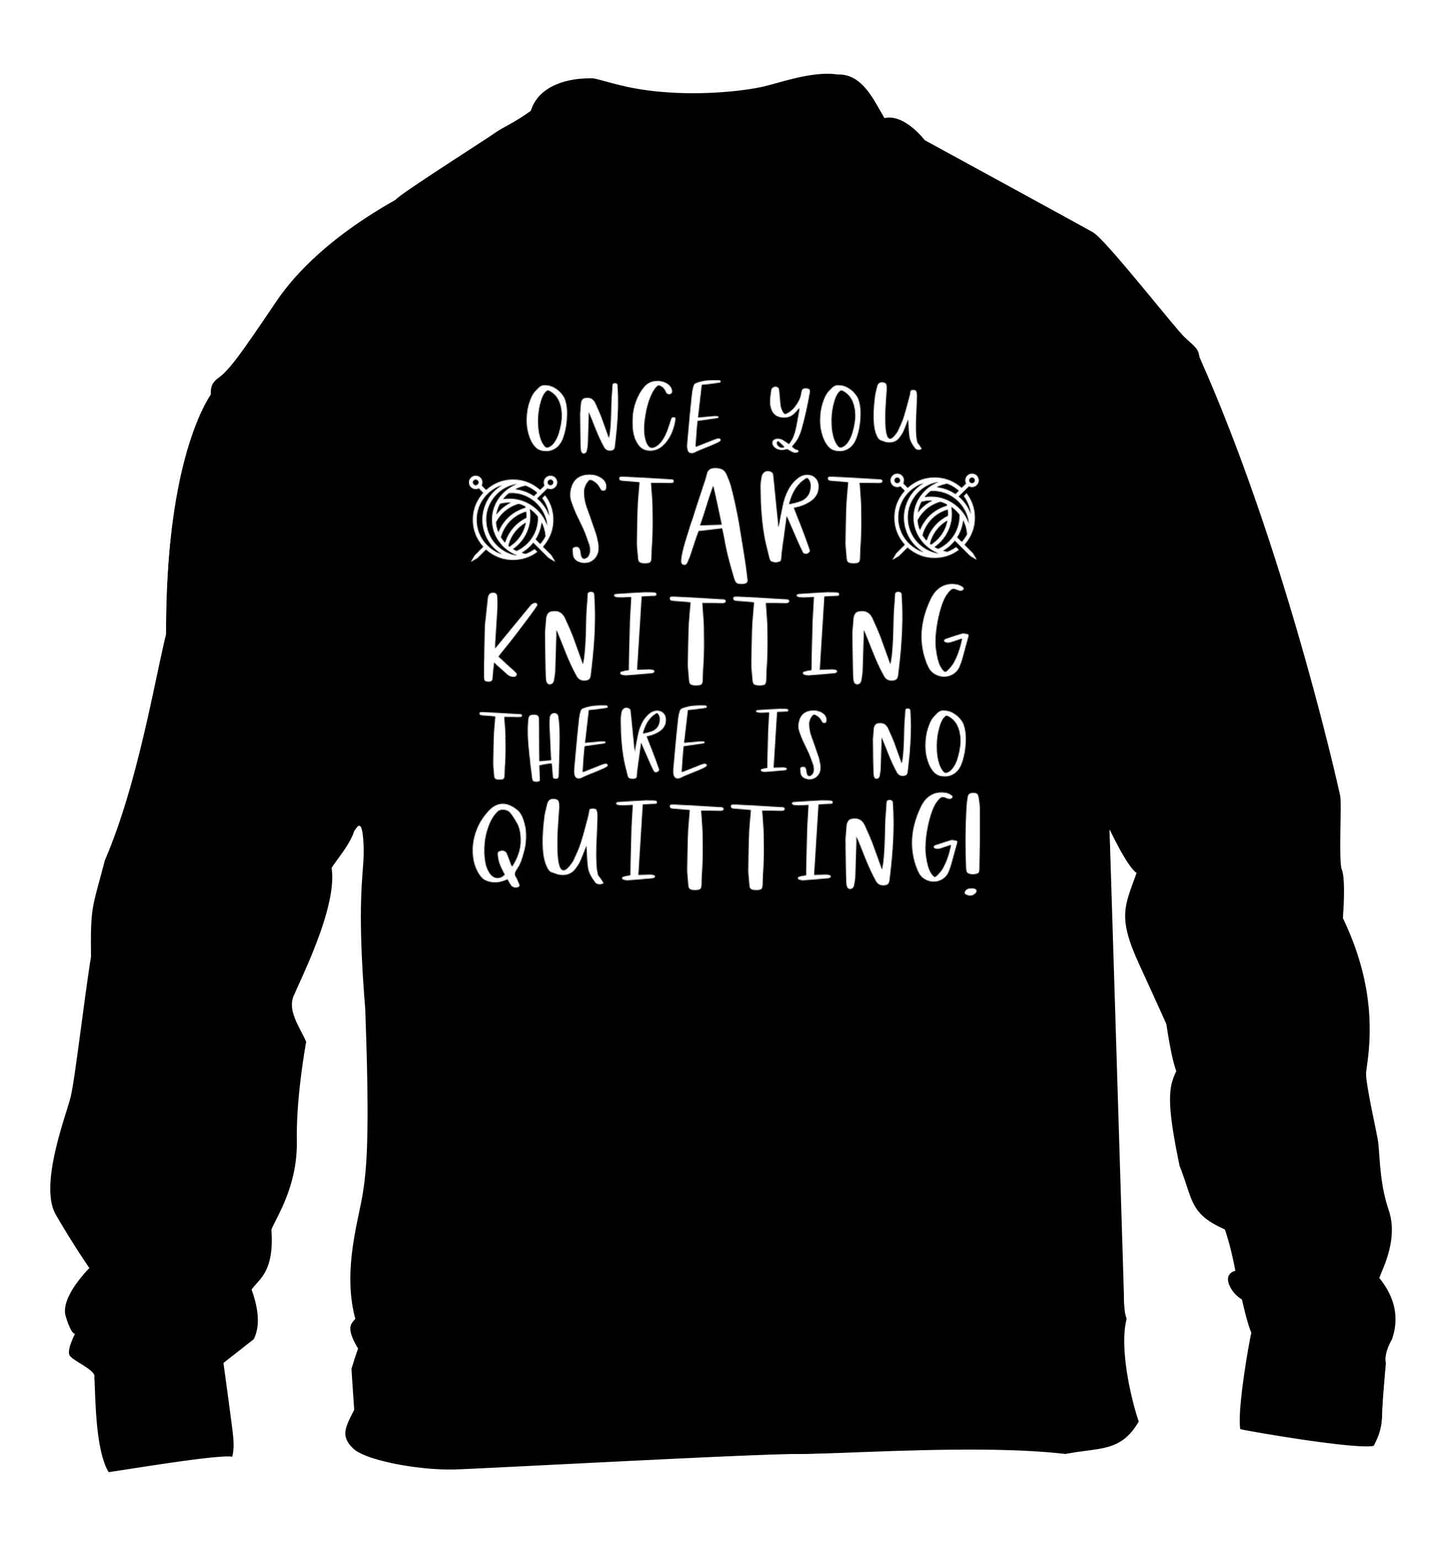 Once you start knitting there is no quitting! children's black sweater 12-13 Years